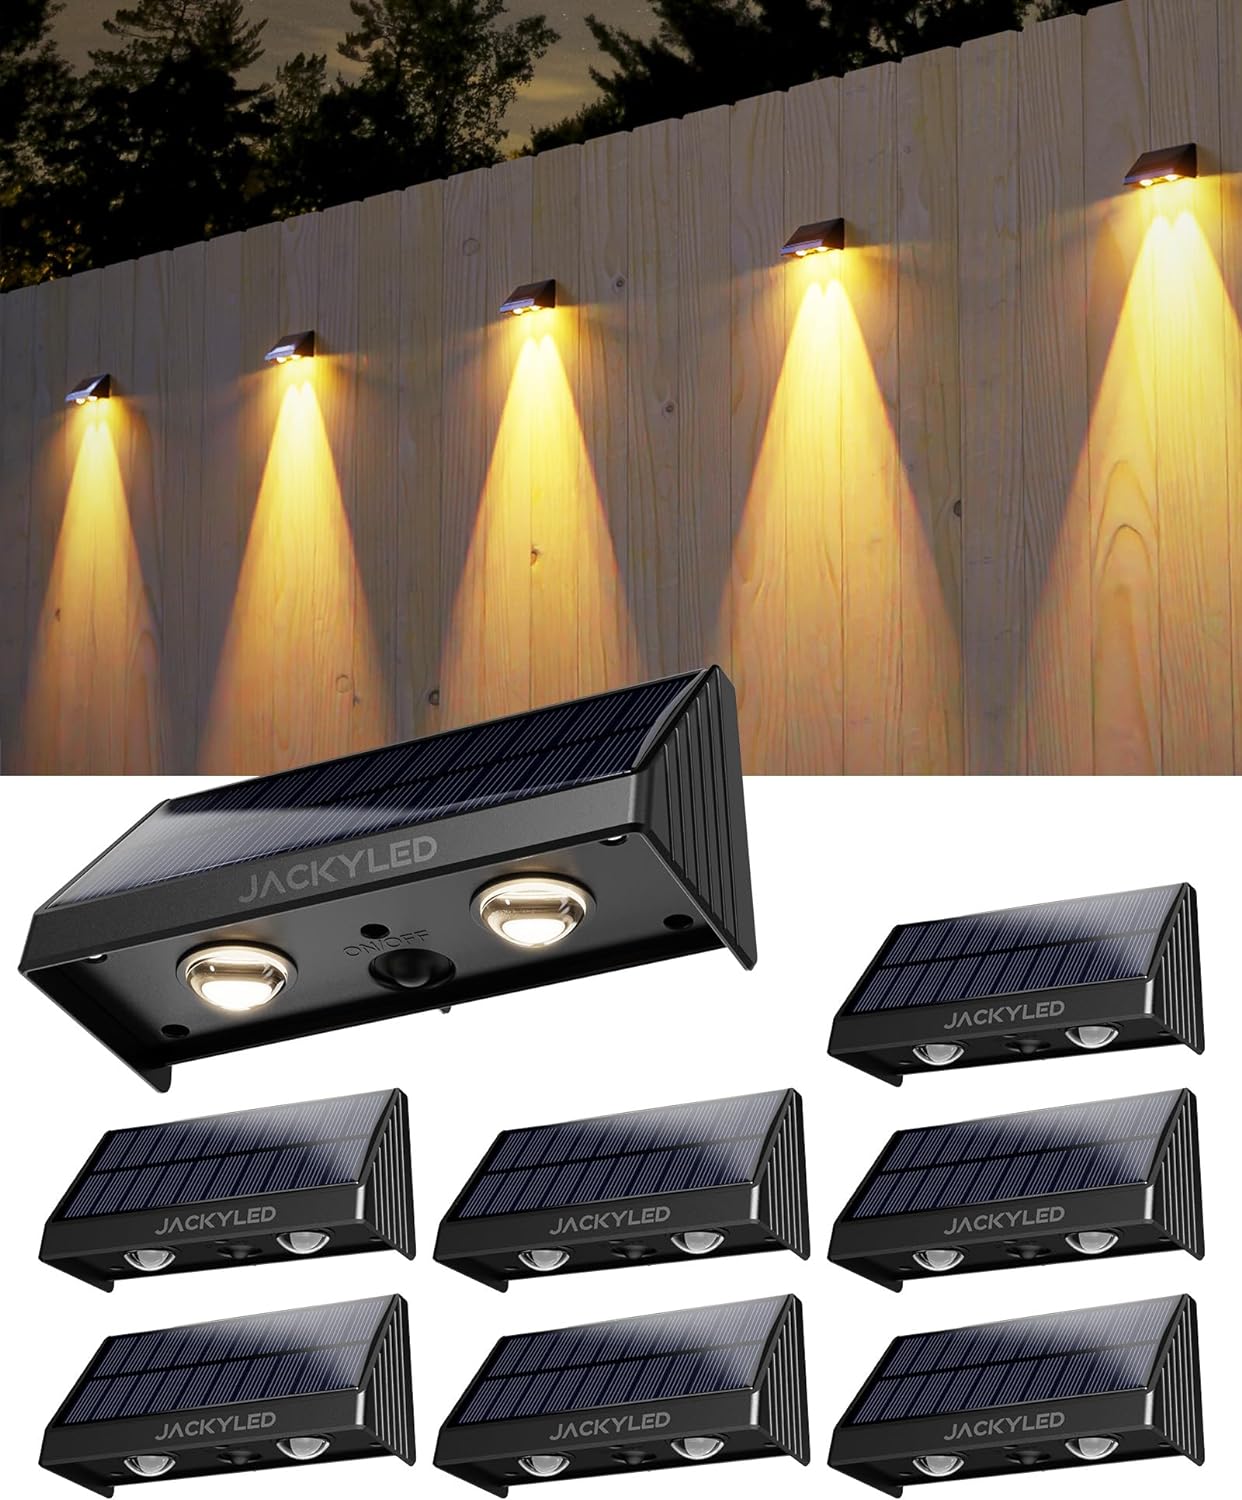 JACKYLED Solar Fence Lights Outdoor, 50 Lumens Bright Fence Lights Outdoor Waterproof Solar Powered Patio Decor Warm White Lights for Wall, Rail, Porch, Backyard, Garden (8/Pack) (8-Pack)